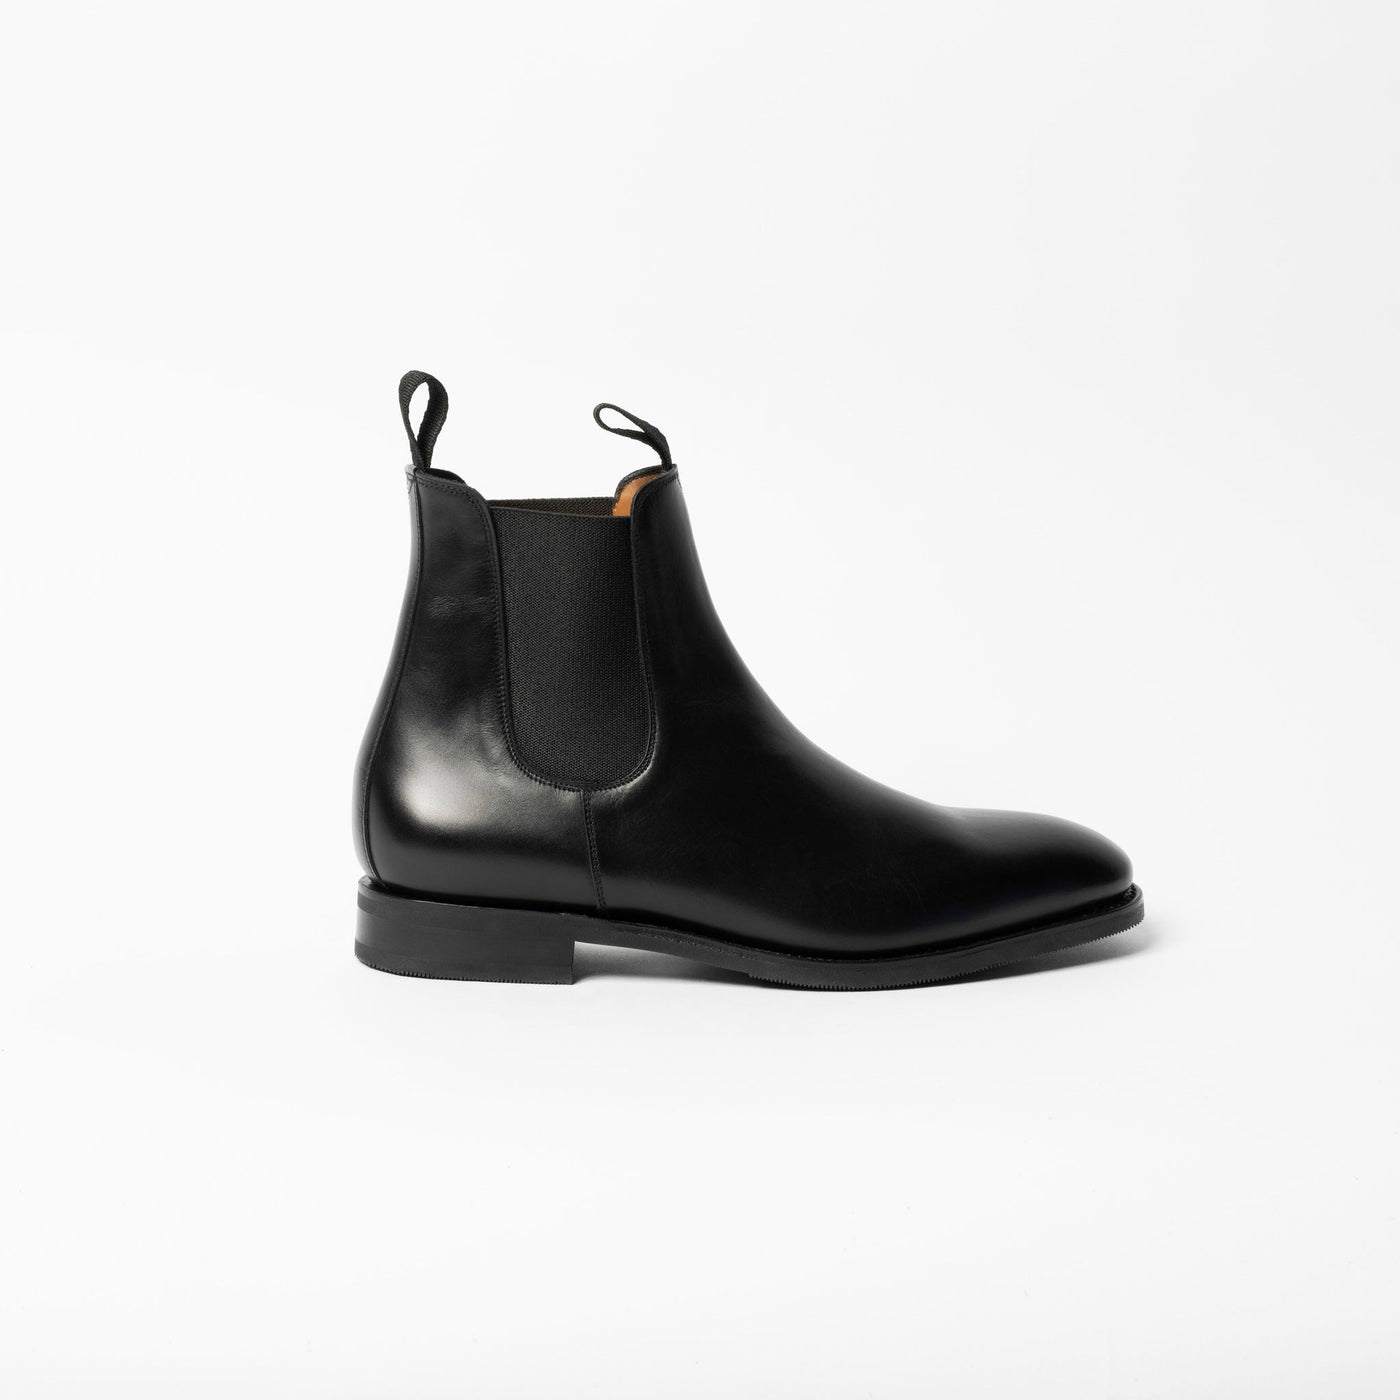 Black Leather Chelsea Boots with rubber sole. 